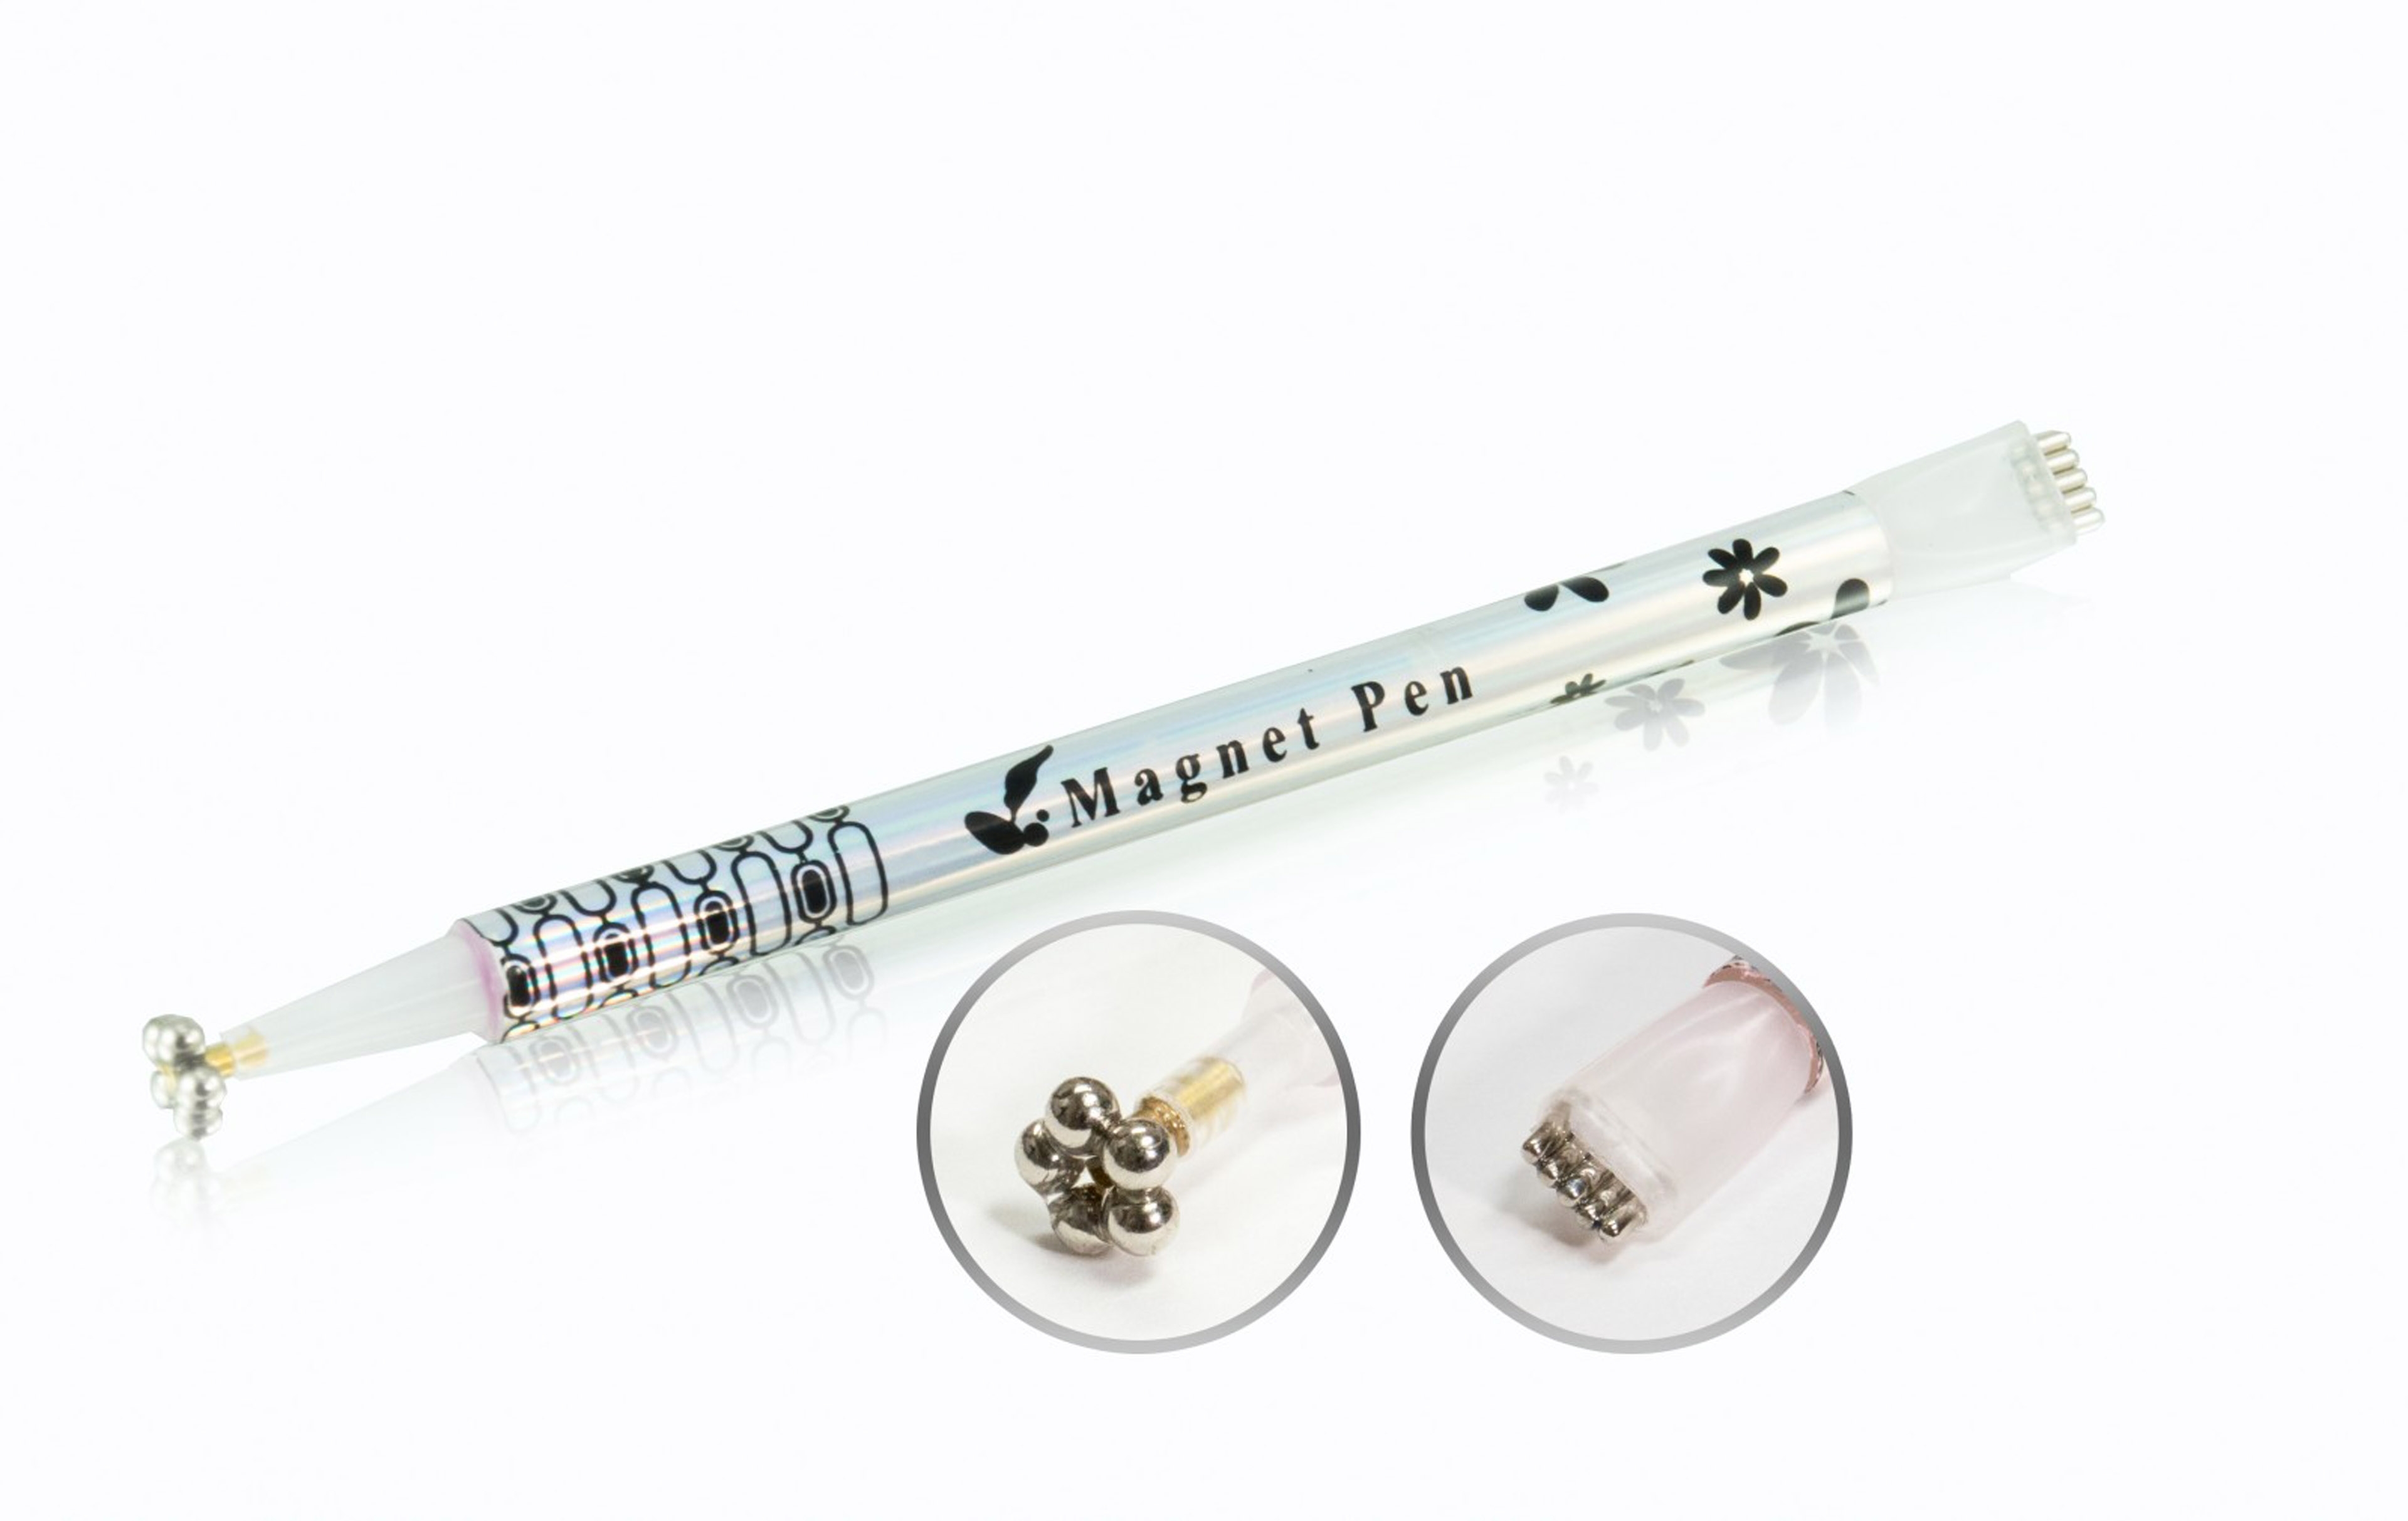 BAEHR BEAUTY CONCEPT - NAILS Magnetic Pen CatEye